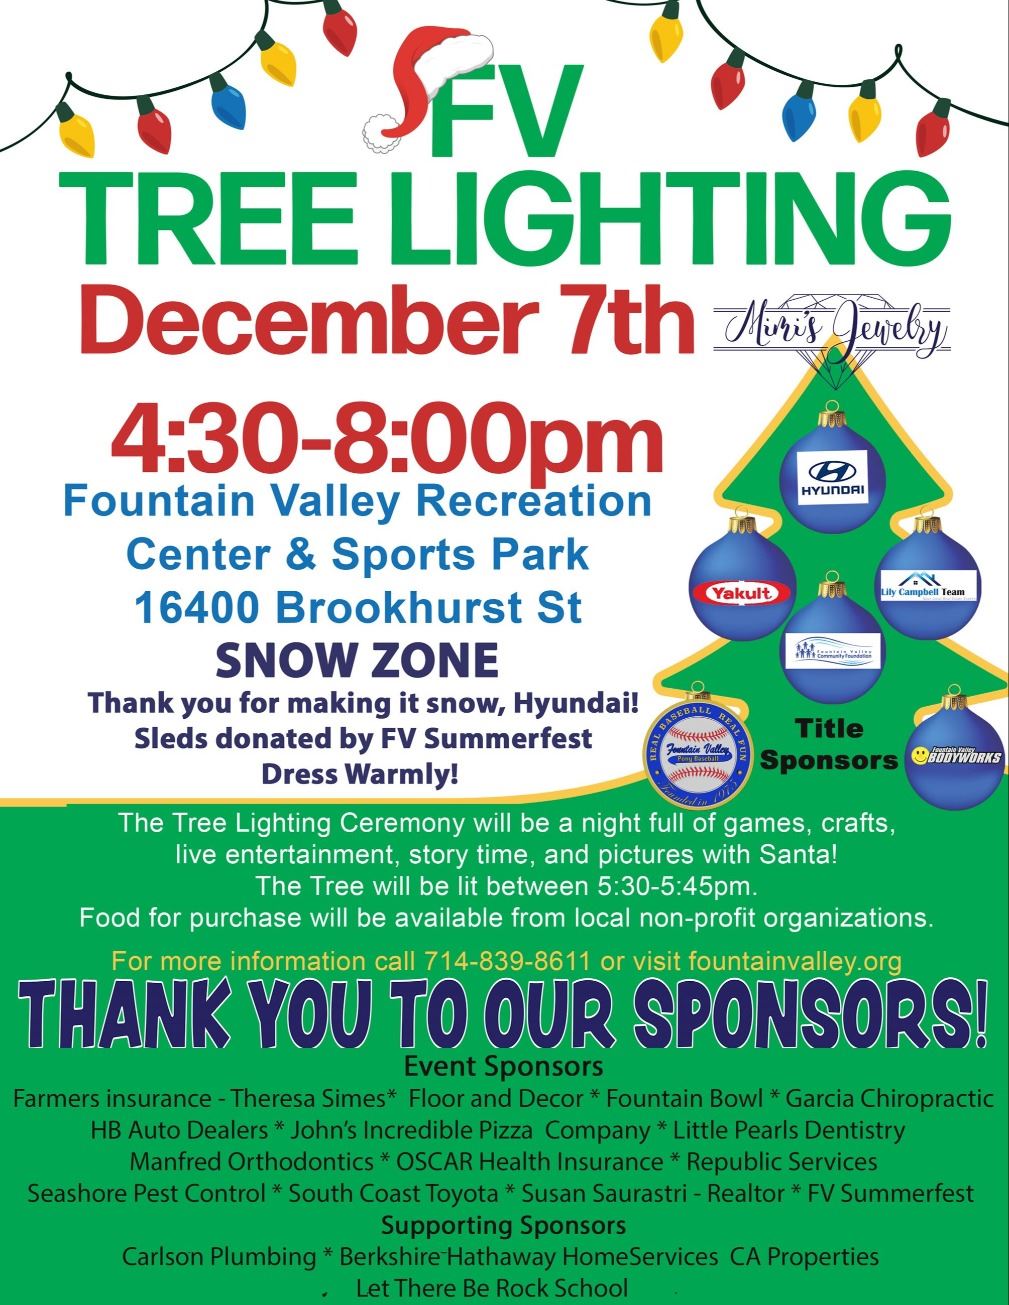 Rain or Shine it’s the Fountain Valley Tree Lighting Time! The City